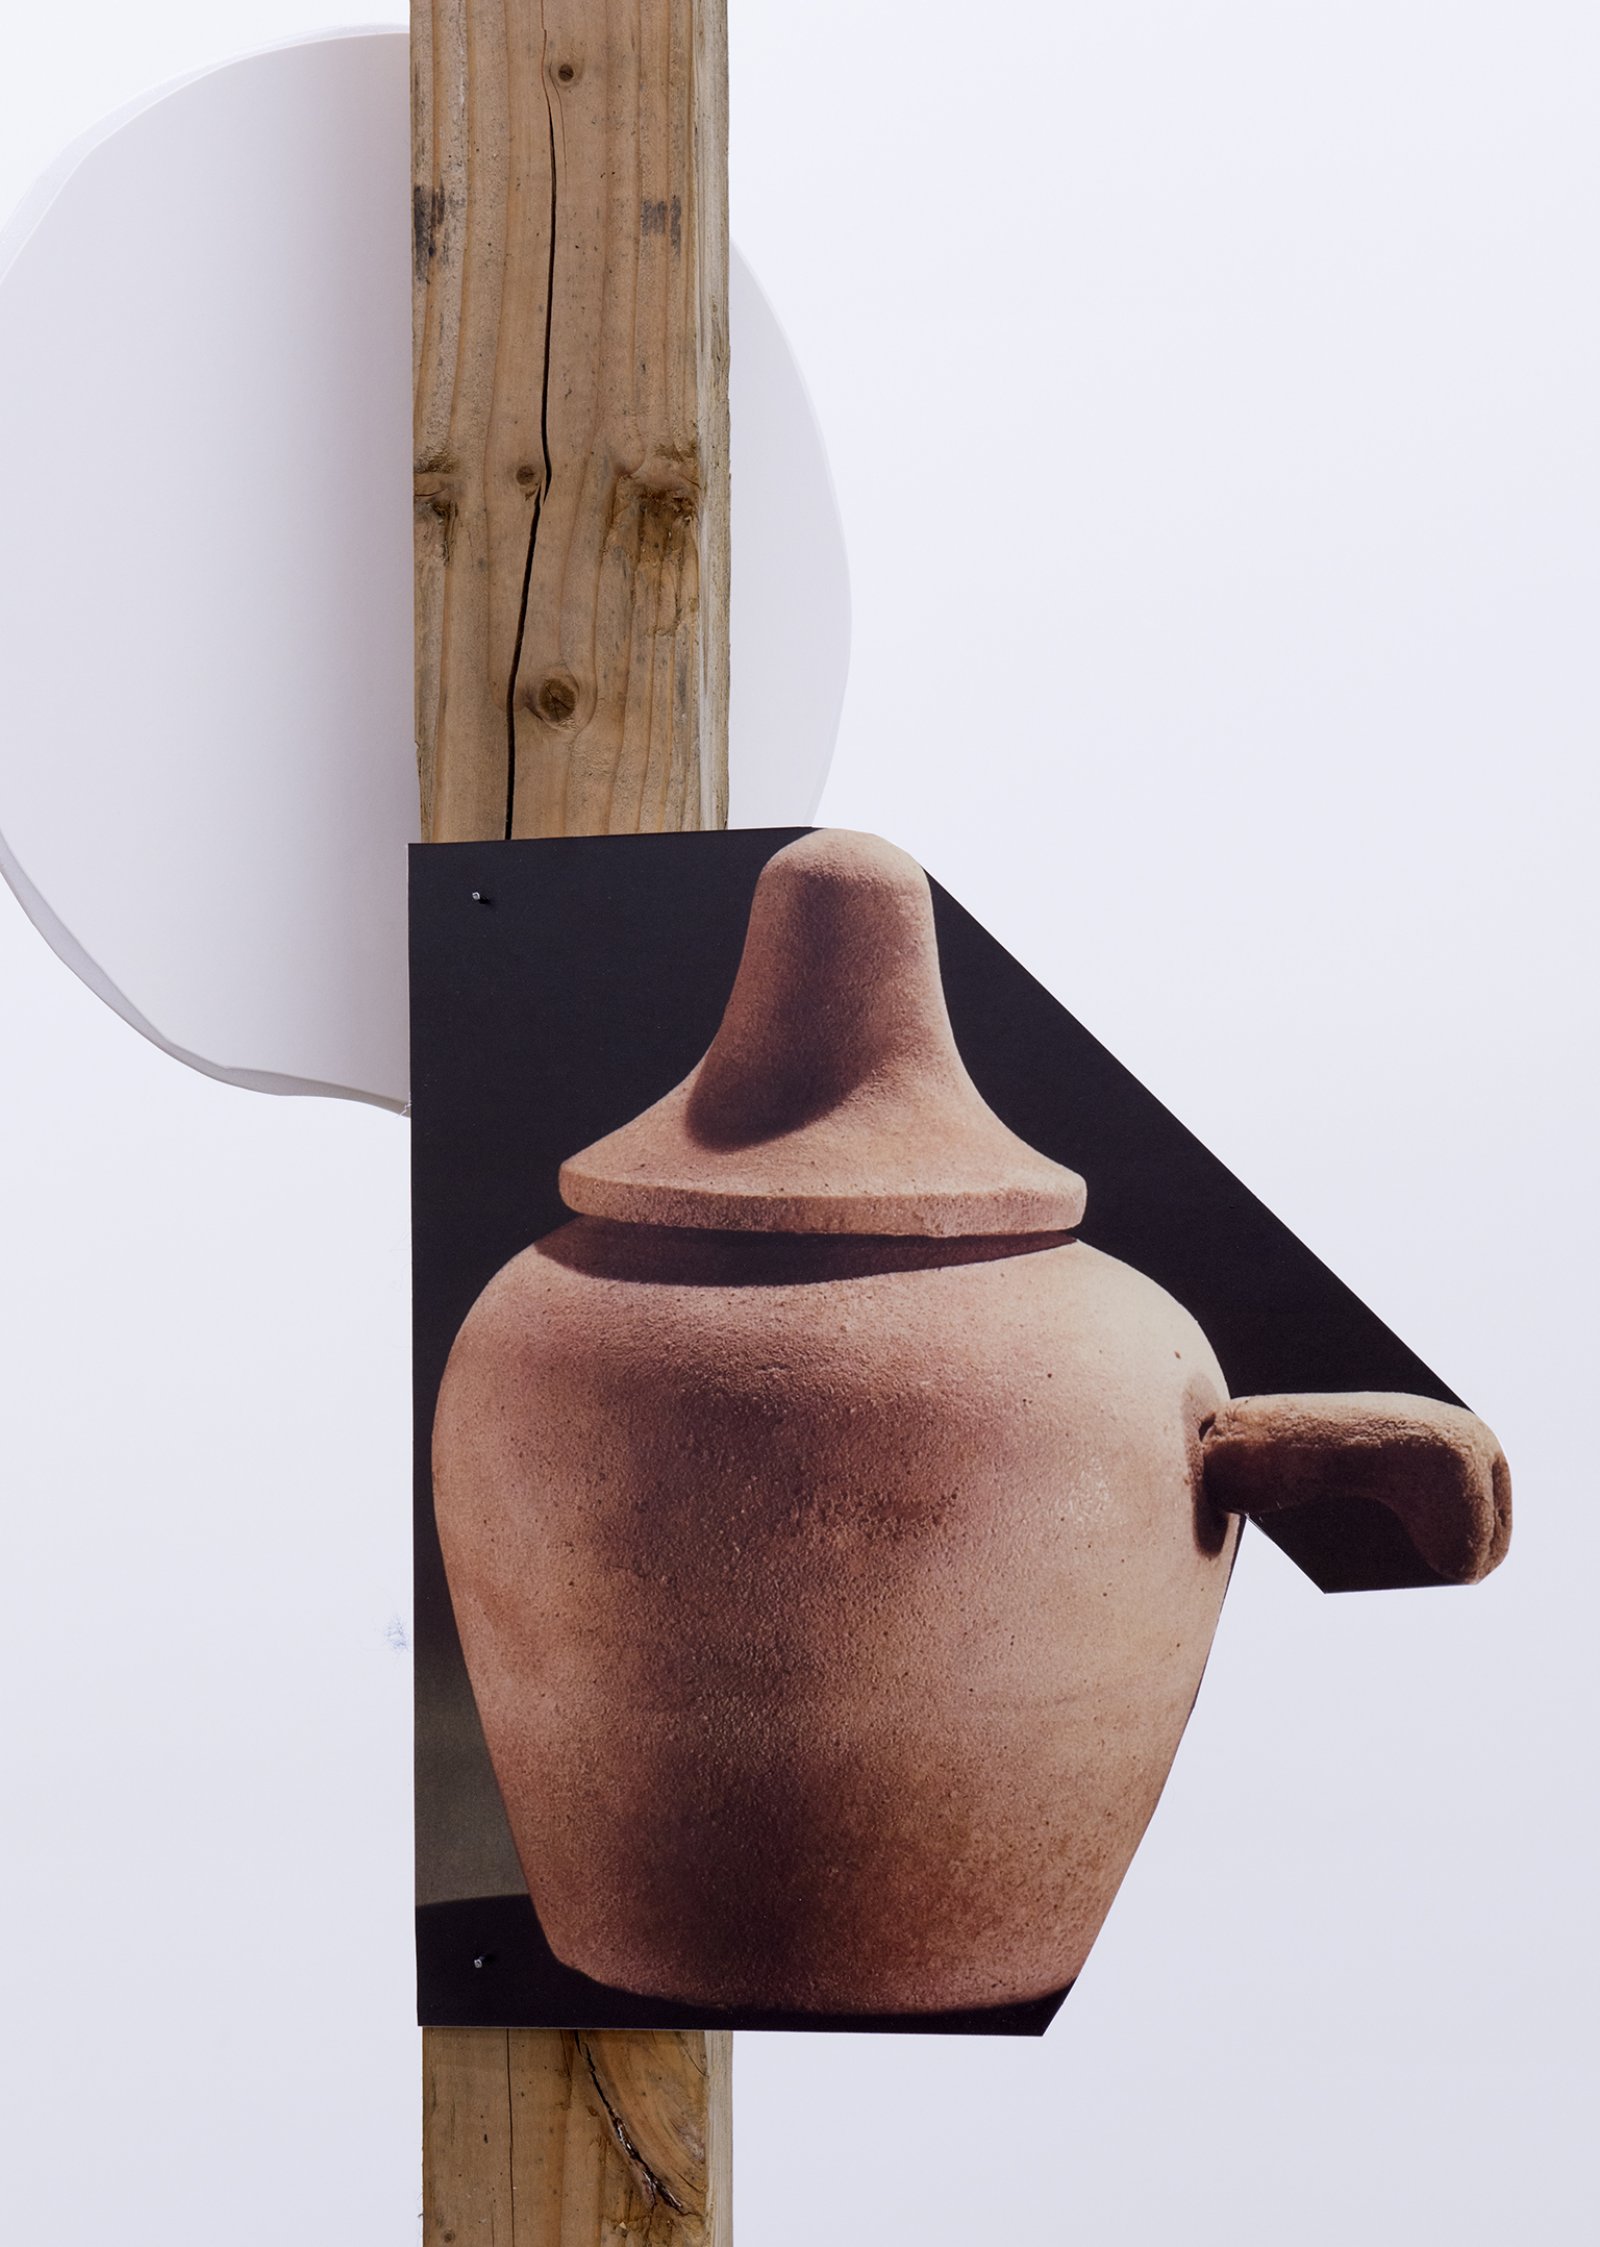 Geoffrey Farmer, This is where the plate goes... (detail), 2014, douglas fir pole, 7 photographs mounted on foamcore, plastic topiary, 2 wooden wall façades, paint, window, sandbags, framed ink and cut-outs mounted on paper, dimensions variable by Geoffrey Farmer